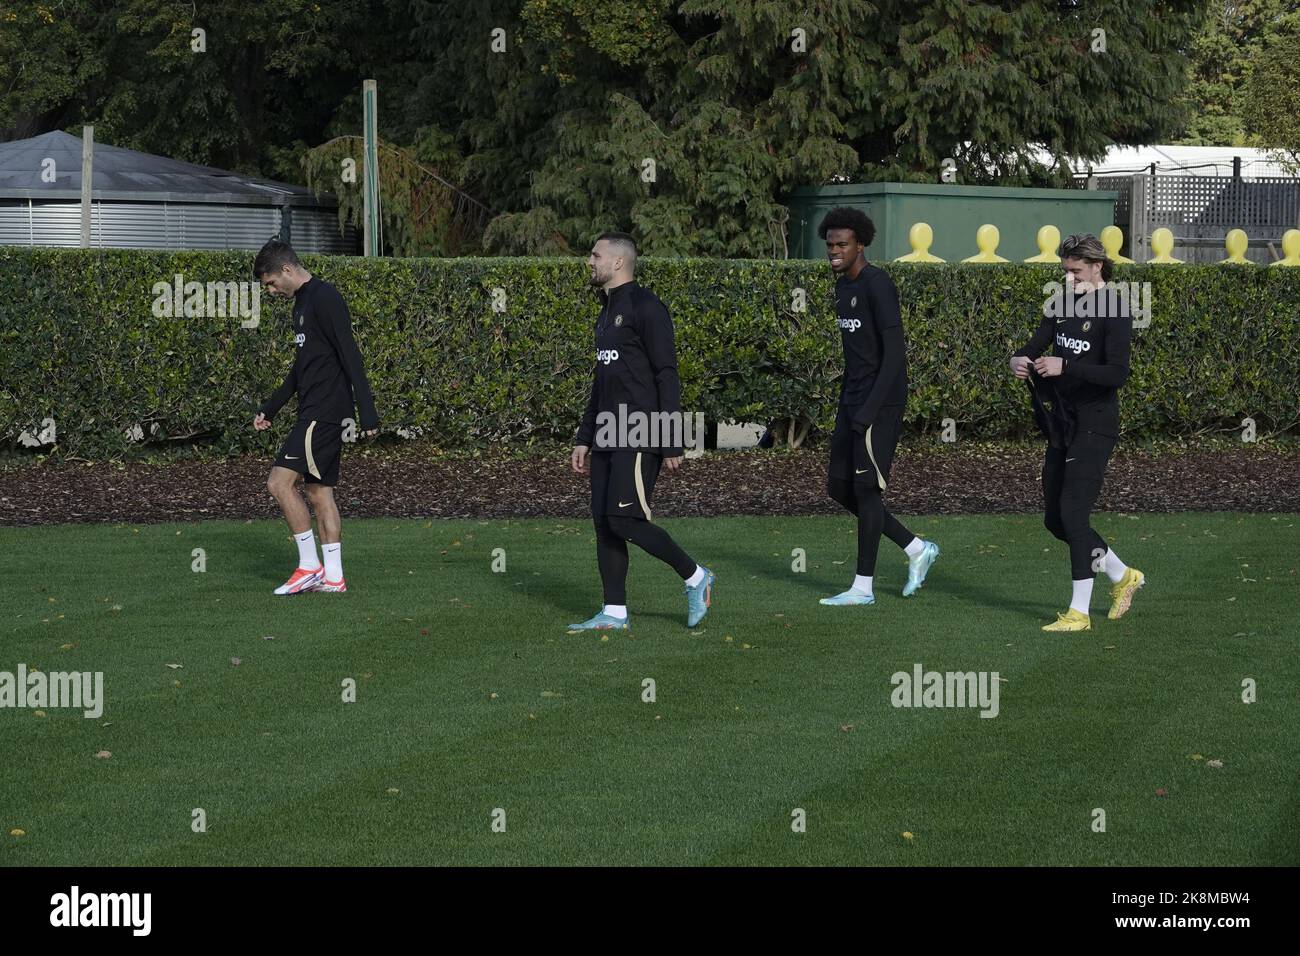 Cobham, Surrey, UK. 24th Oct, 2022. Chelsea Football Club players walk out for training at the clubsÕ Cobham training ground, for their Champions League game against FC Salzburg tomorrow in Austria Here : Christian Pulisic, leads Mateo Kovacic, Carney Chukwuemeka and Conor Gallagher Credit: Motofoto/Alamy Live News Stock Photo